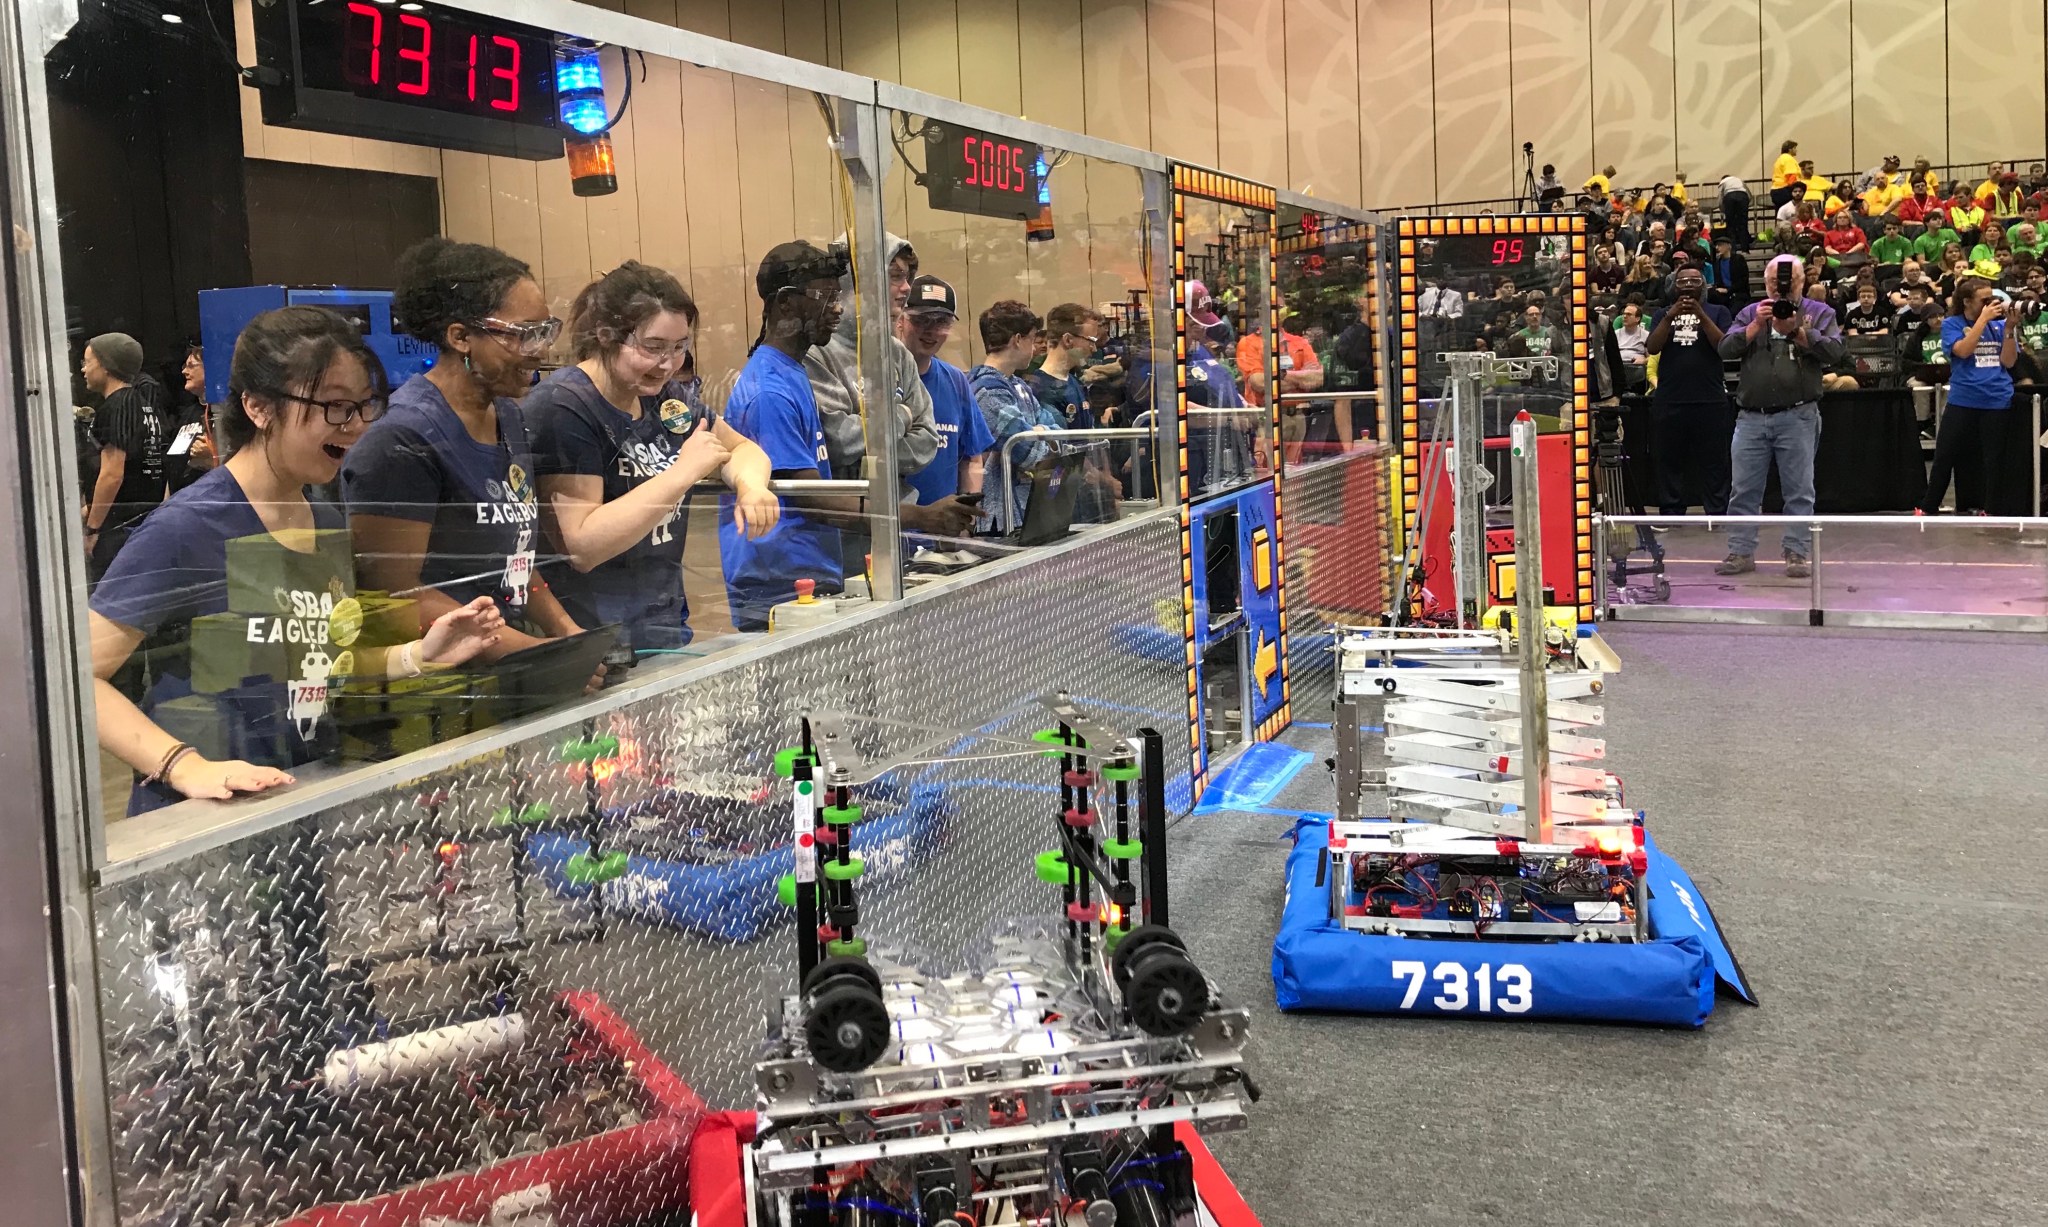 SBA Eaglebots from Cordova, Tennessee, at left in navy, March 16 at the FIRST Robotics Rocket City Regional.